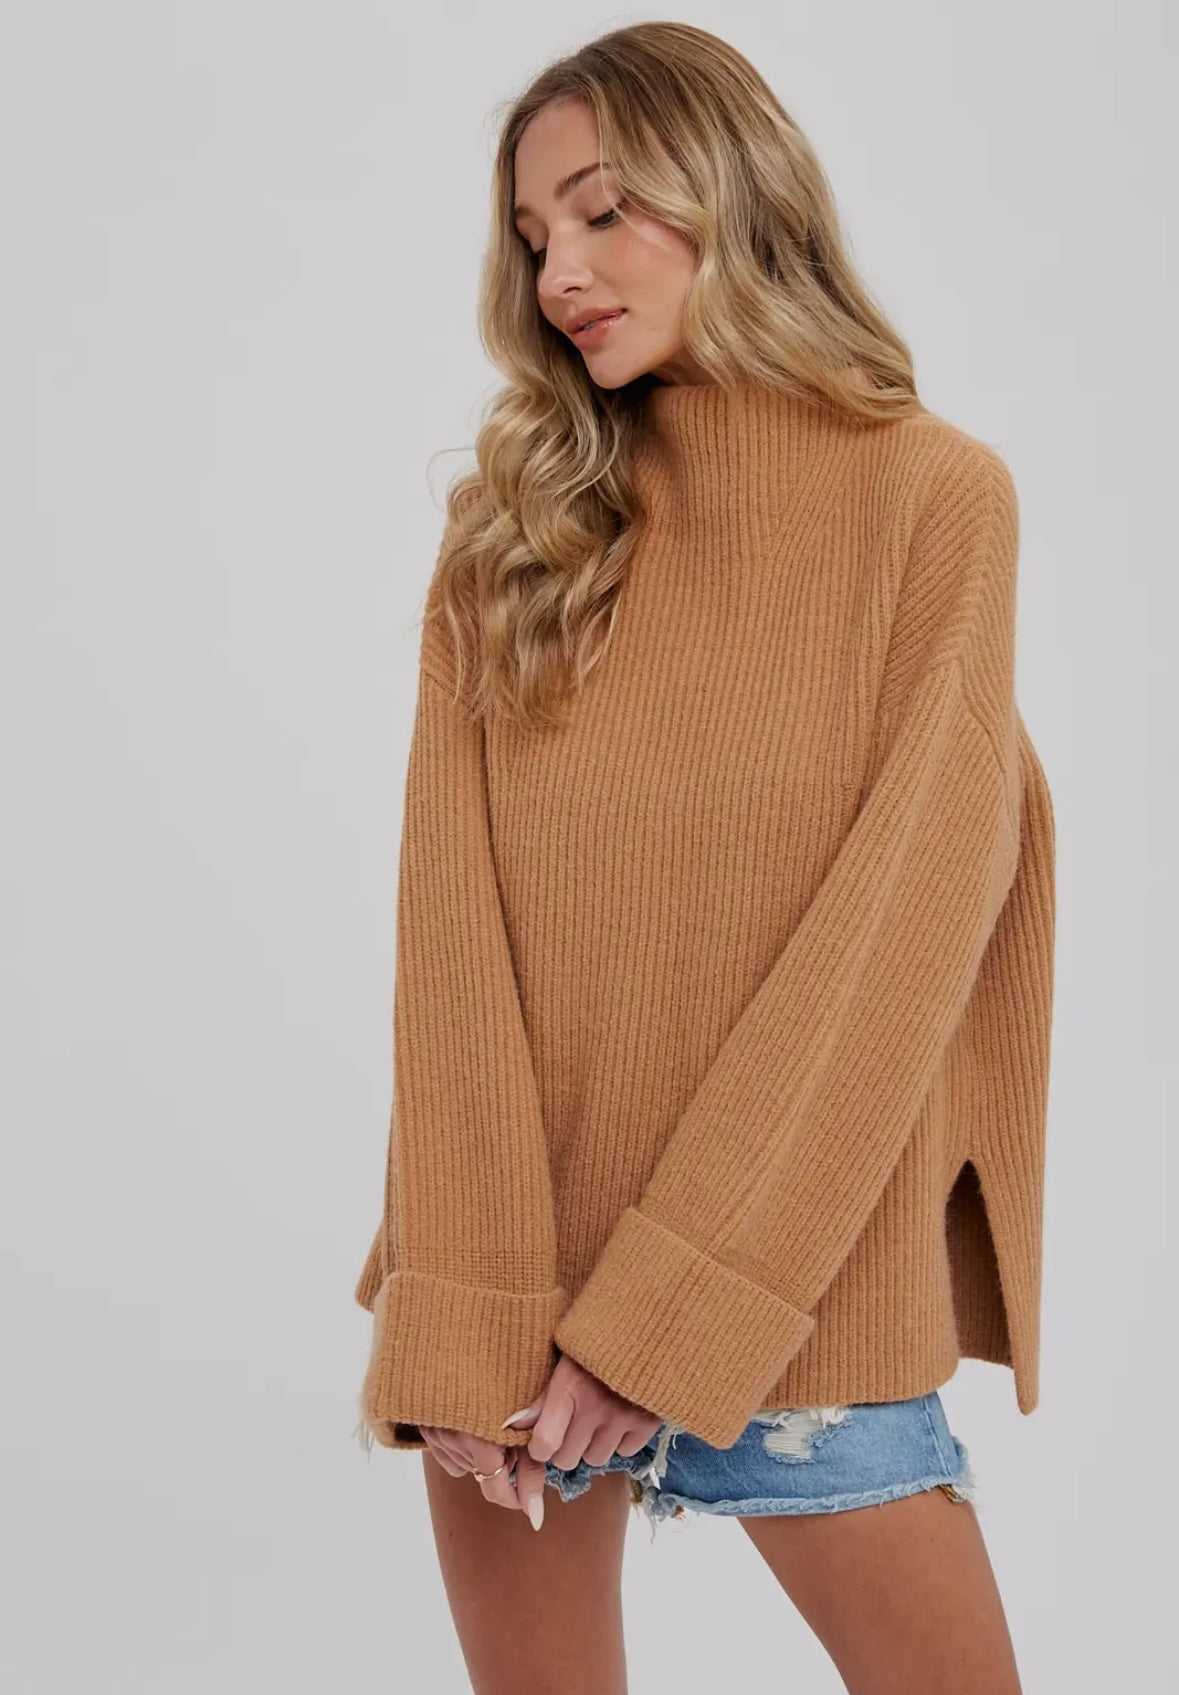 Funnel neck knit sweater